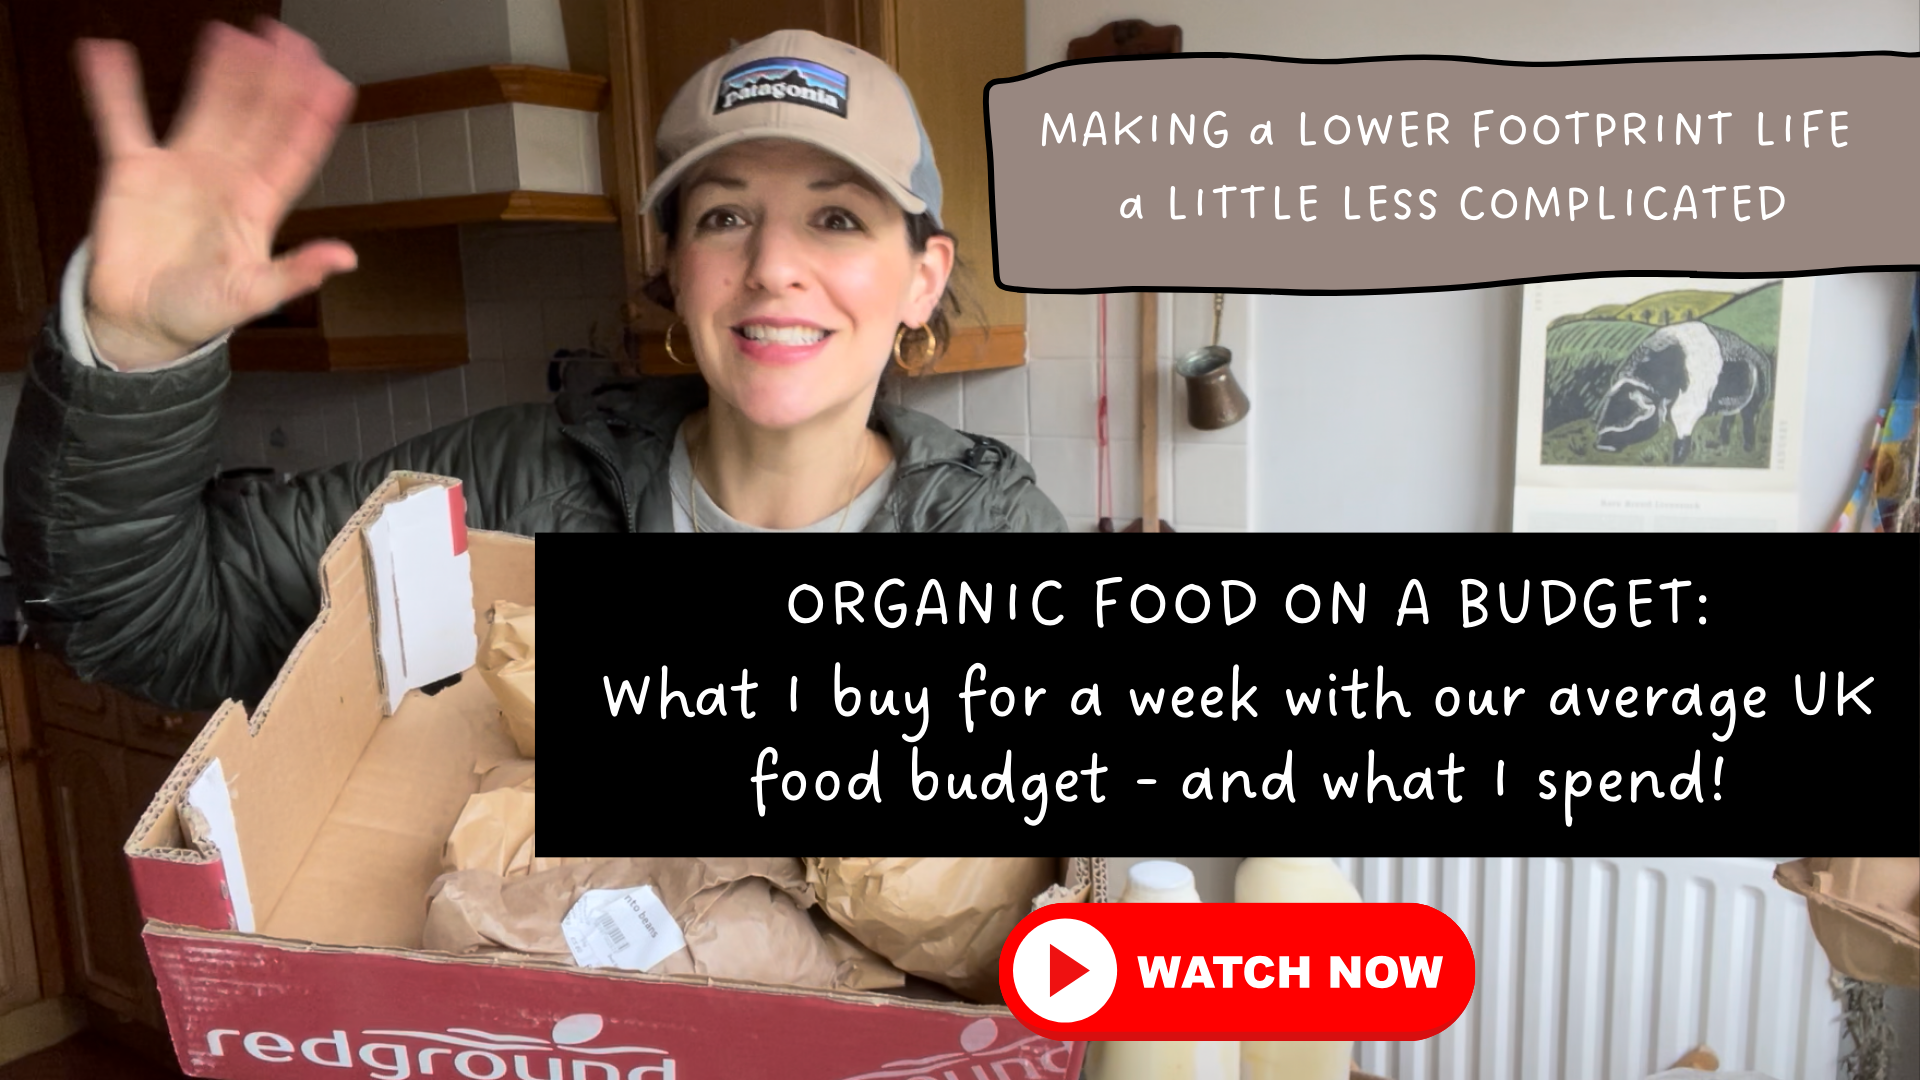 How to shop organic and sustainable food on a budget: what I buy and spend in a week!